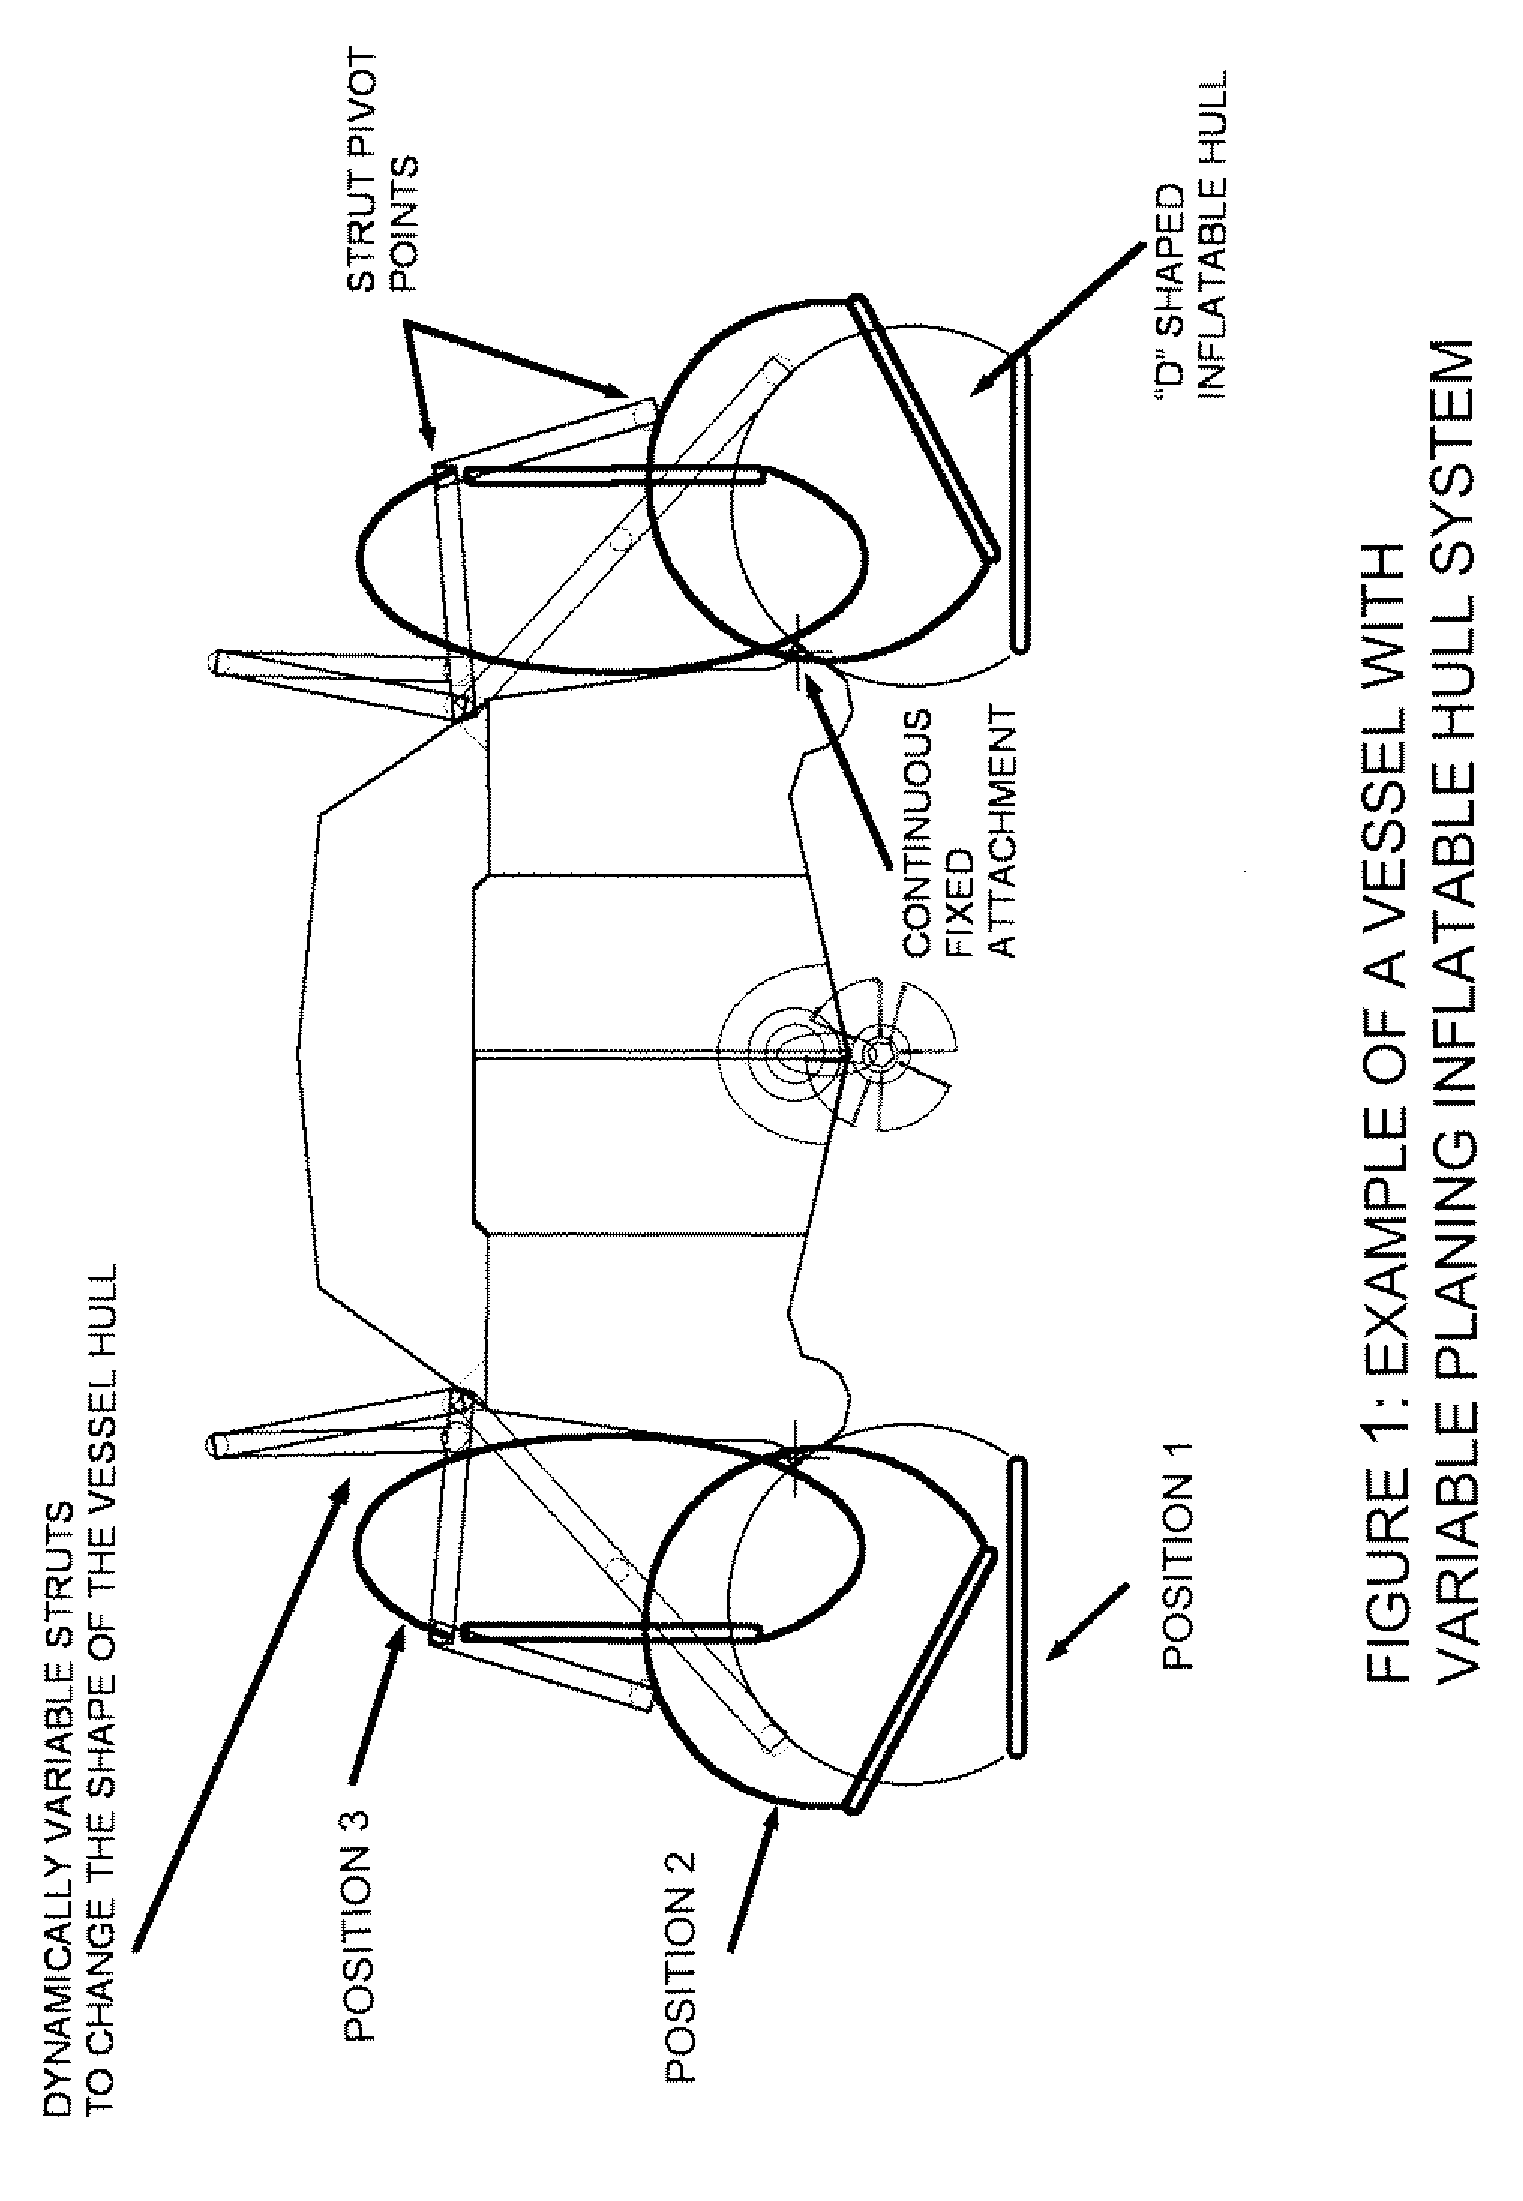 Variable Planing Inflatable Hull System